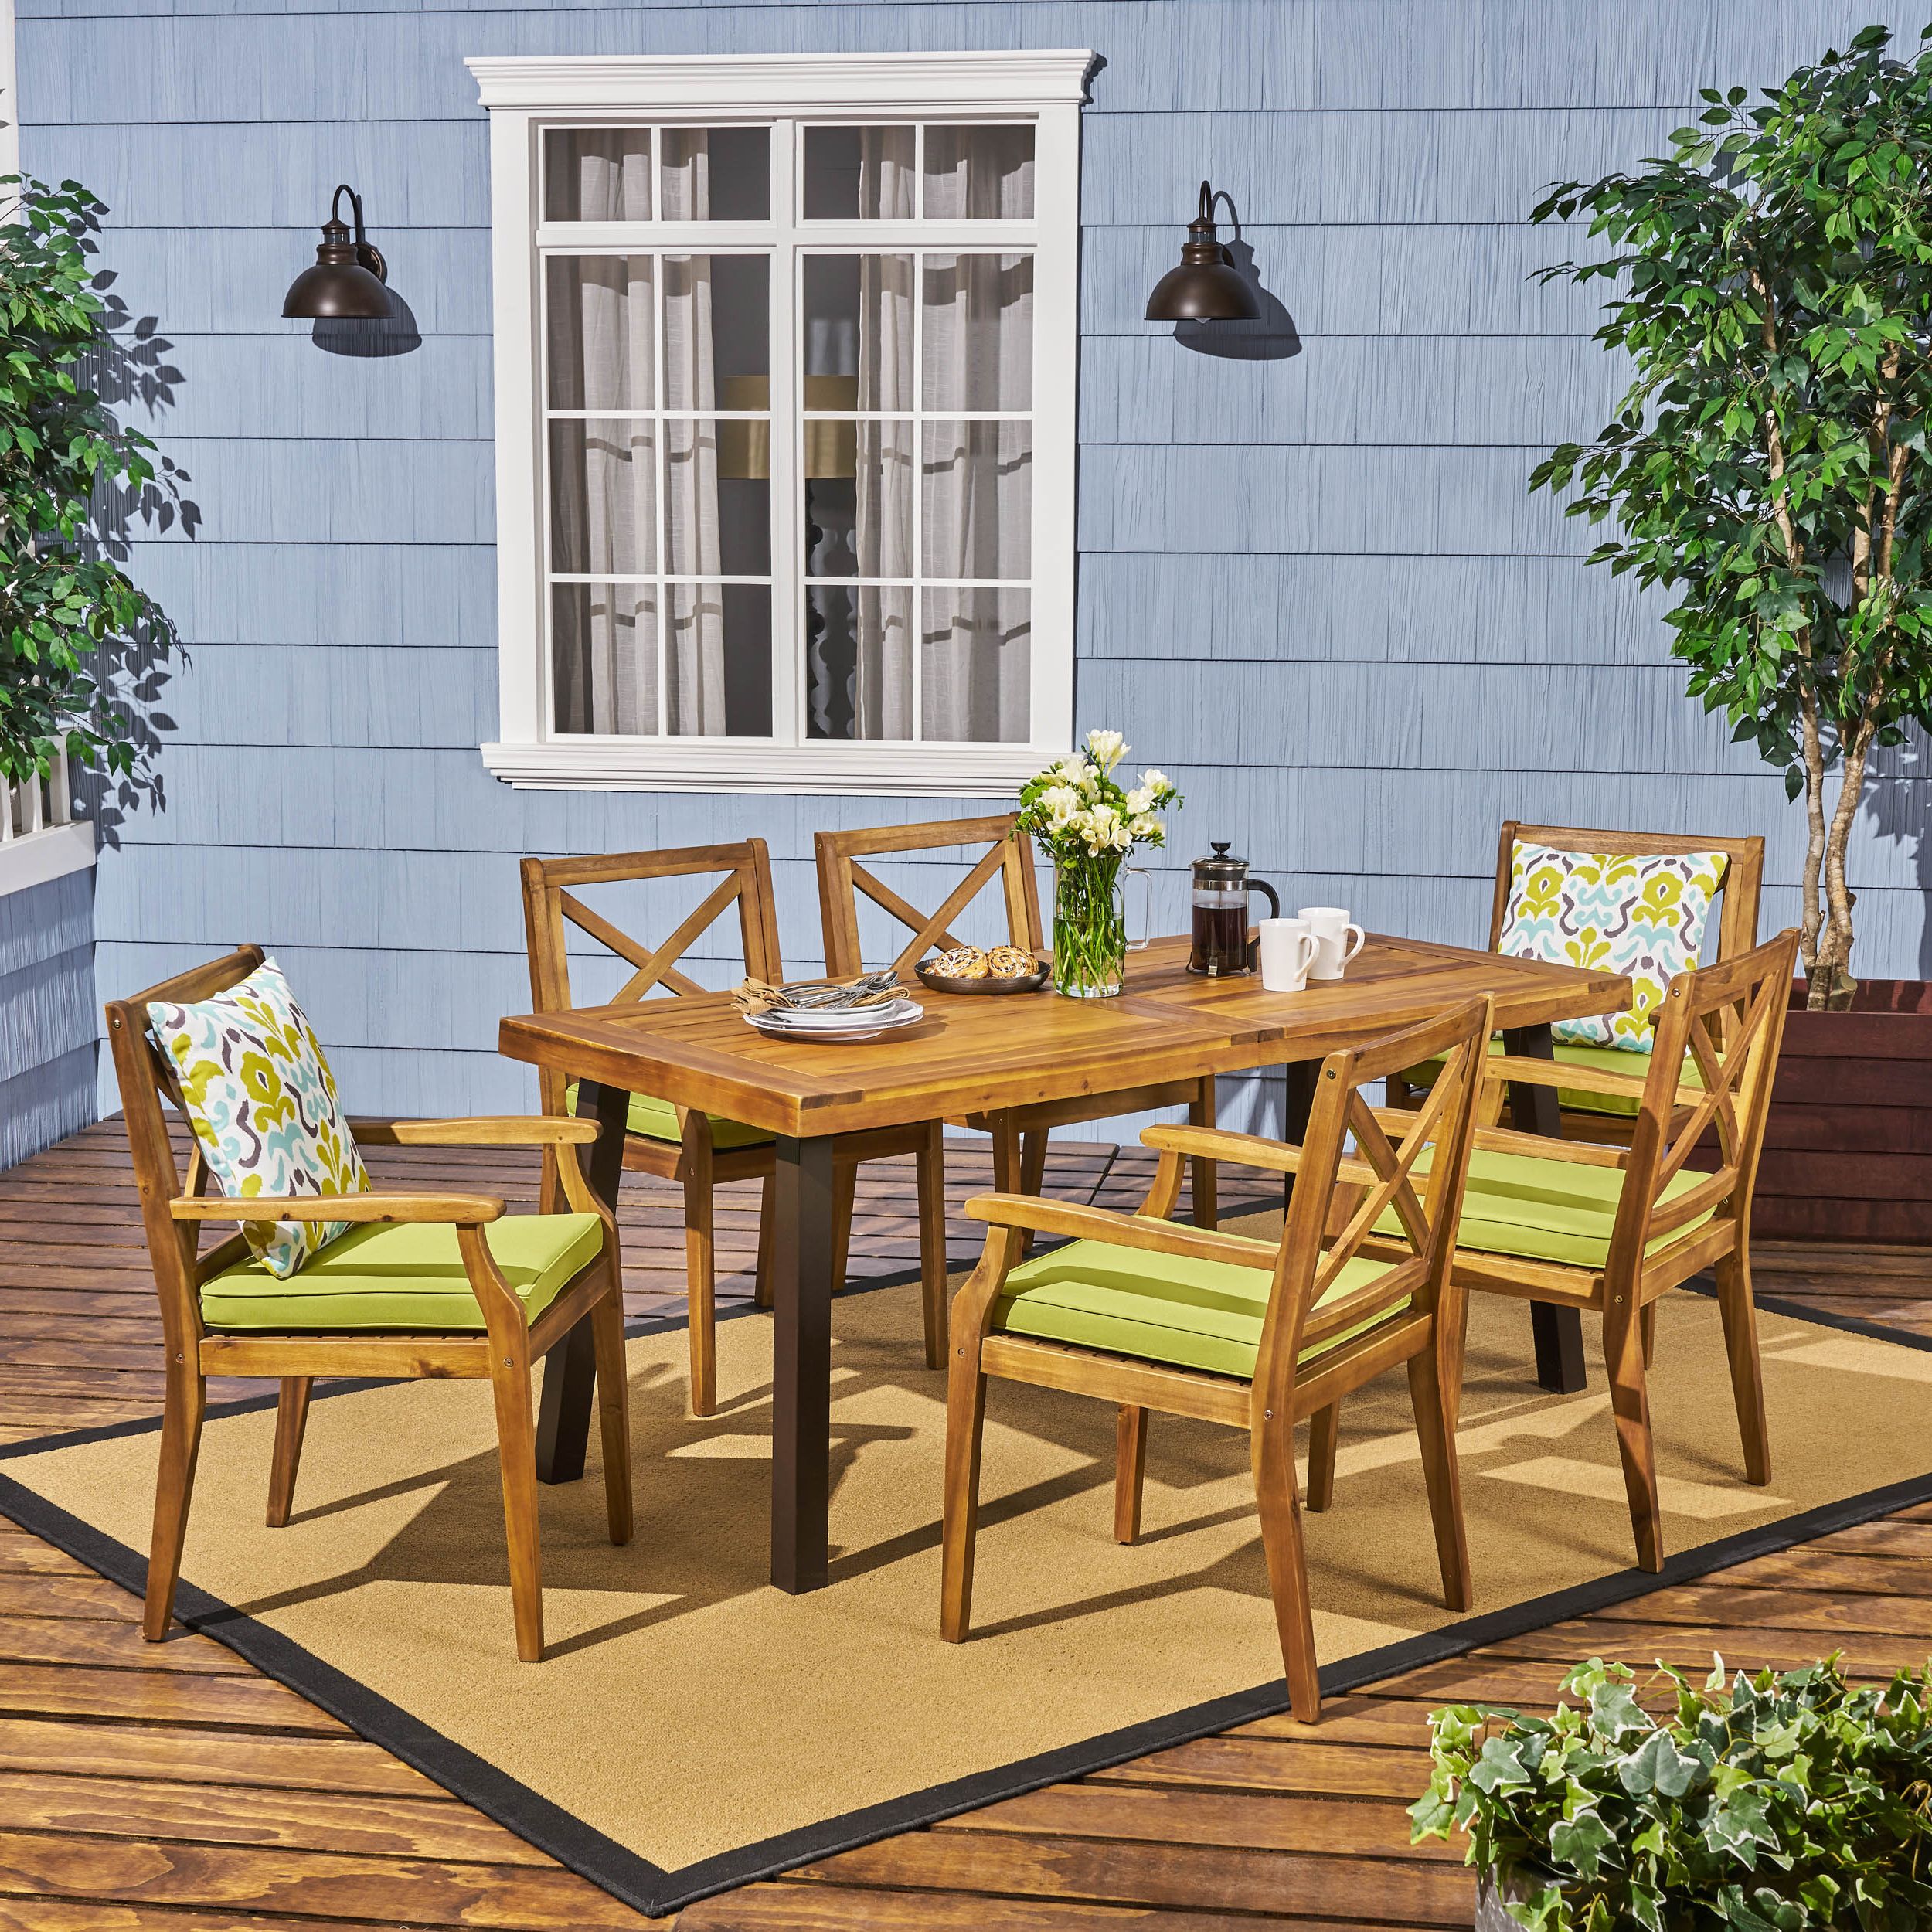 Newest Corey Outdoor 7 Piece Acacia Wood Dining Set With Table, Teak, Rustic Intended For Acacia Wood Outdoor Seating Patio Sets (View 3 of 15)